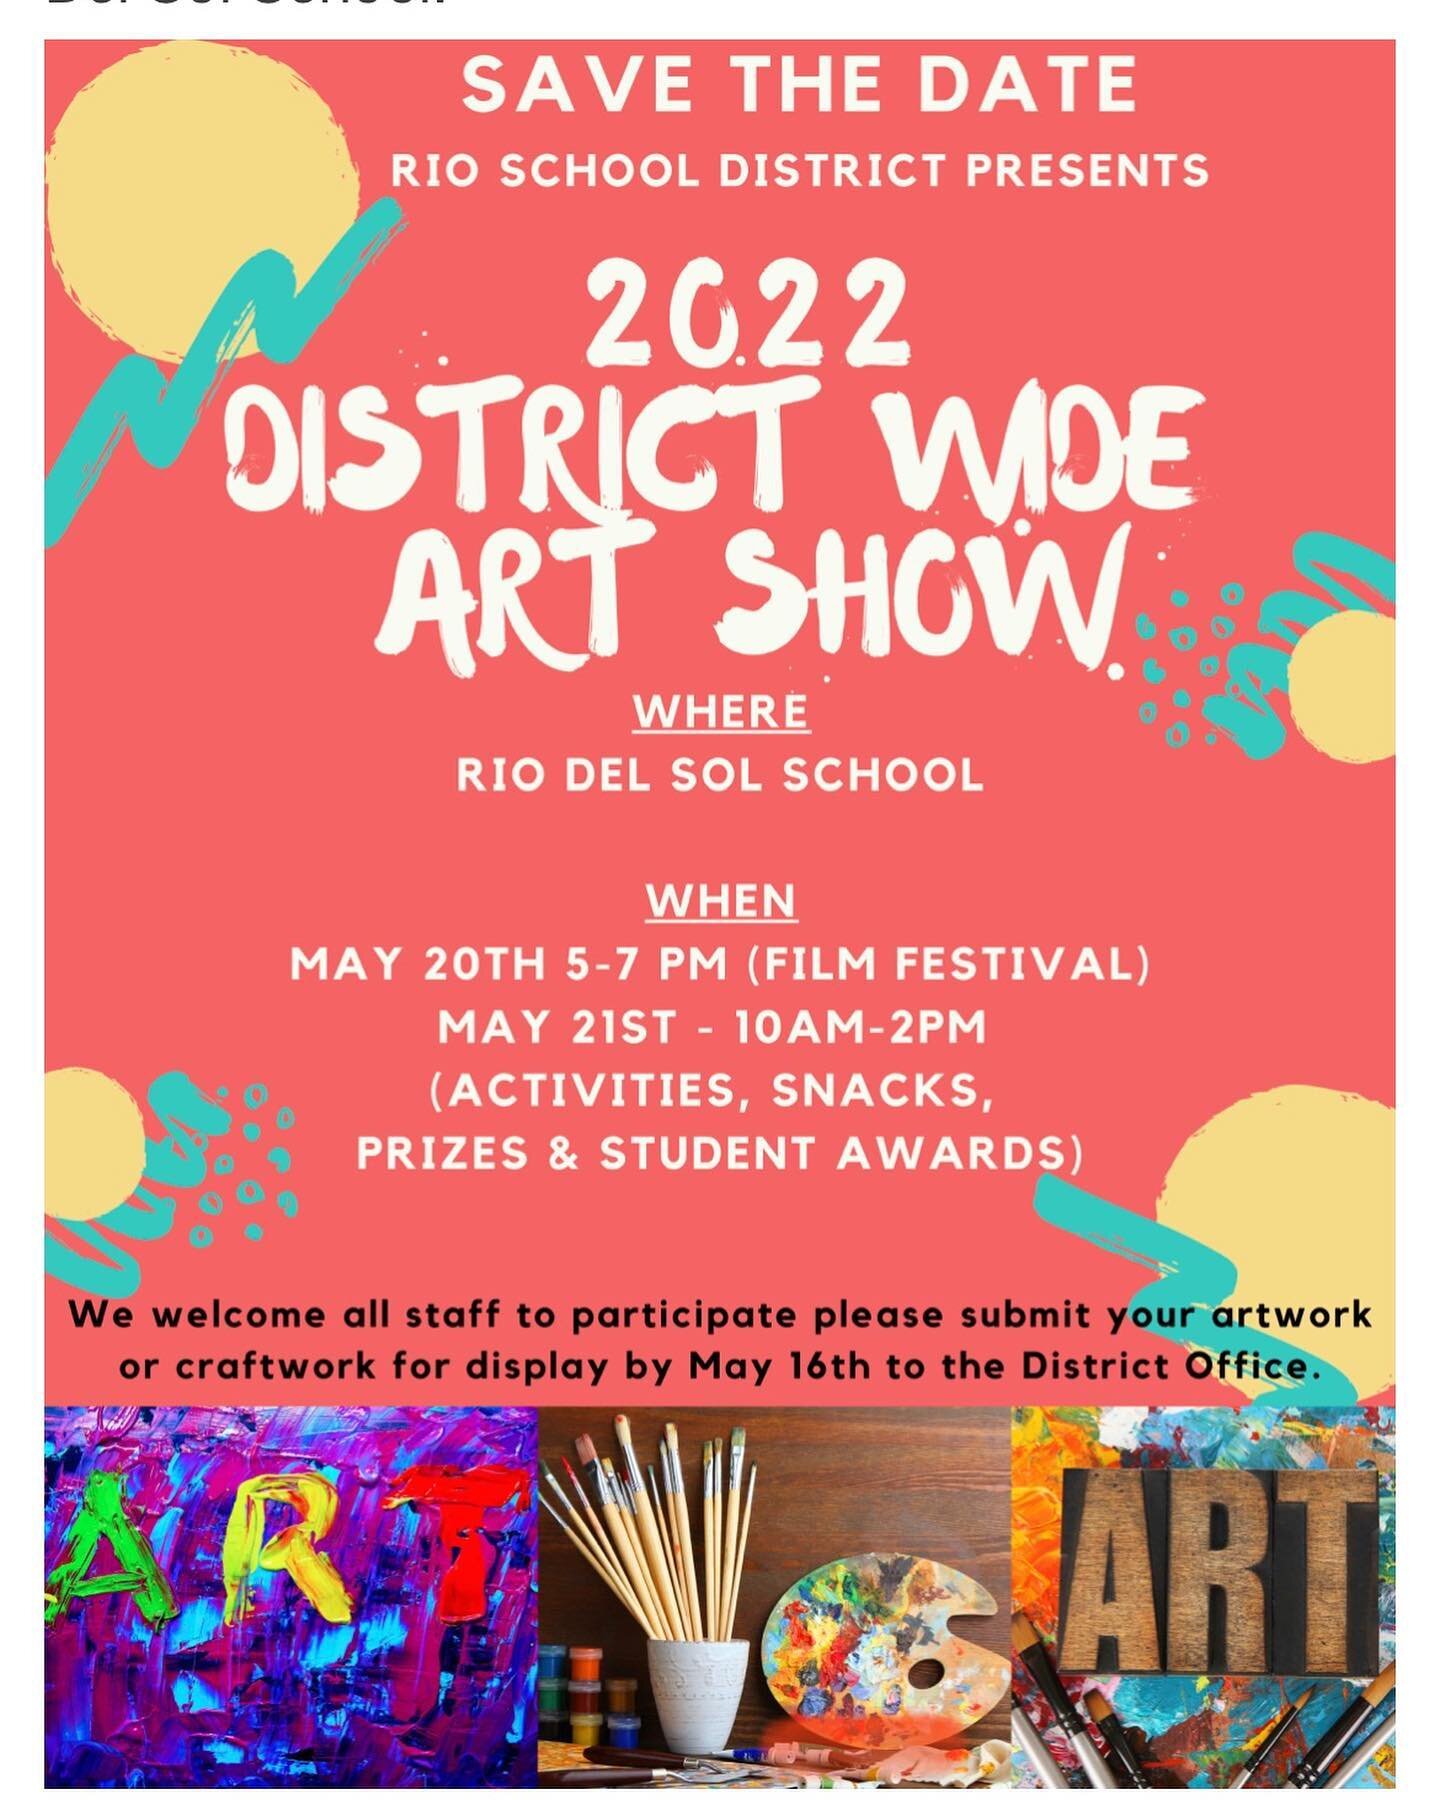 Please come to this everyone. District wide art show w some seriously talented young artists! All are welcome.